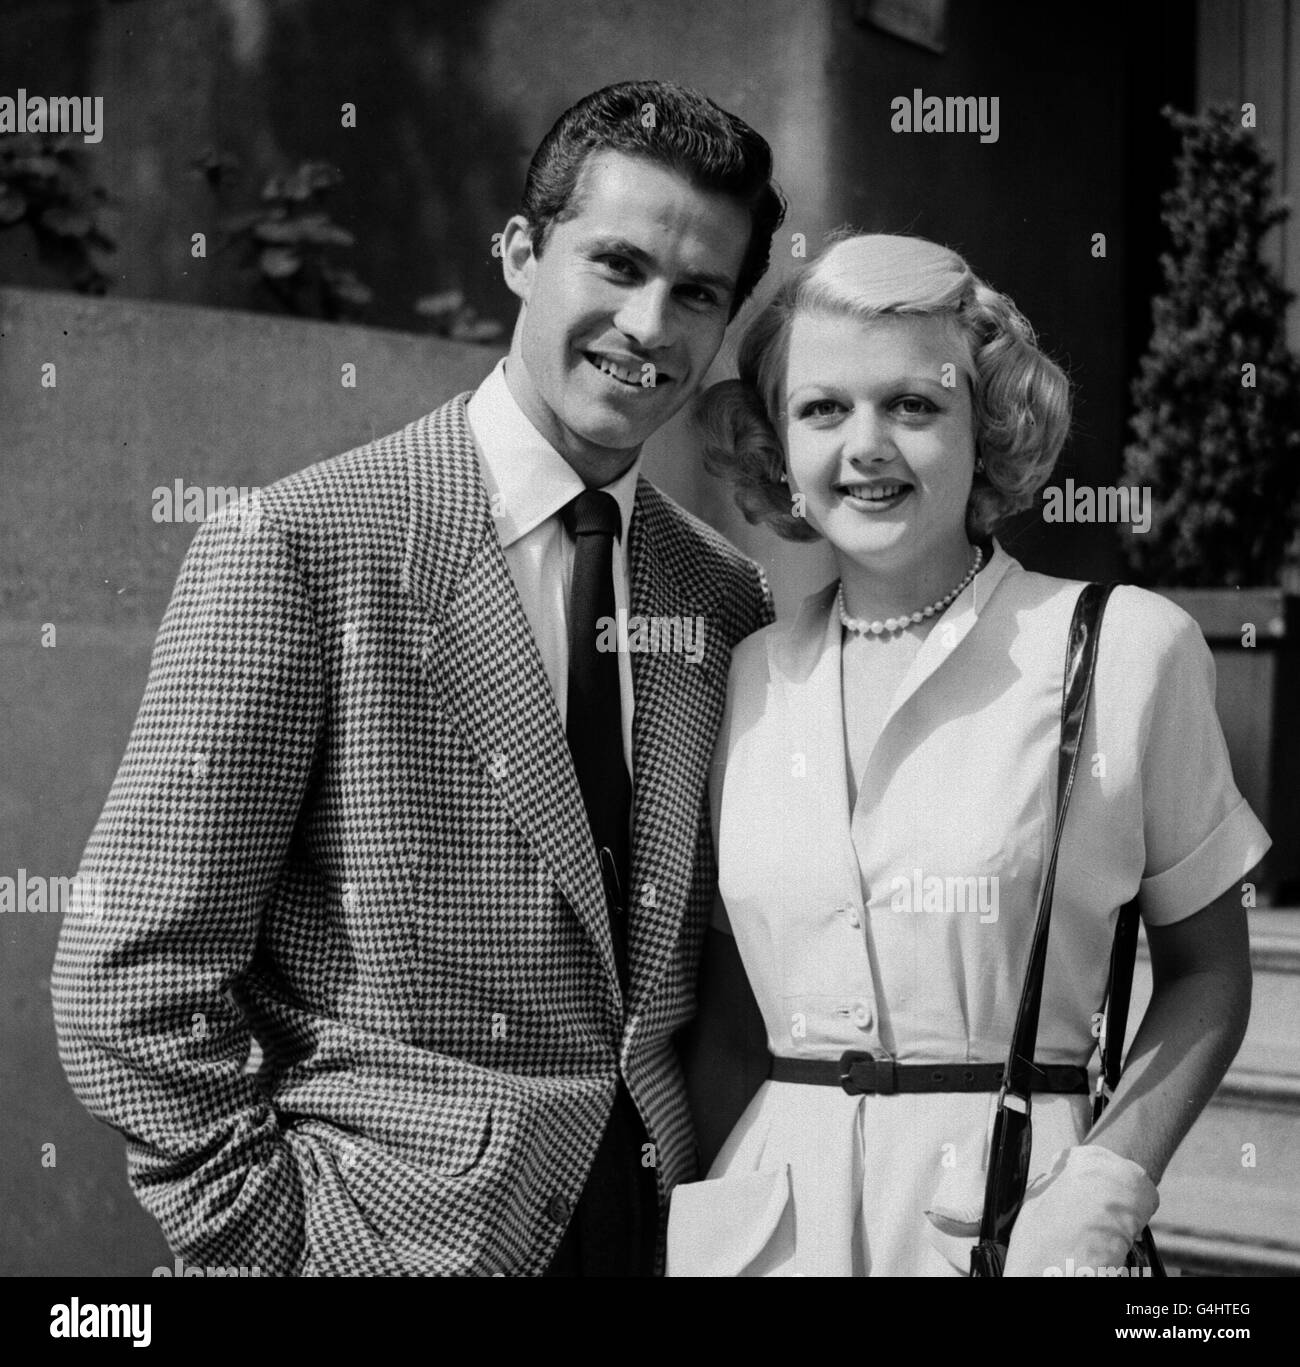 ANGELA LANSBURY & FIANCE. Actress Angela Lansbury with her actor fiance Peter Shaw, in London. Stock Photo